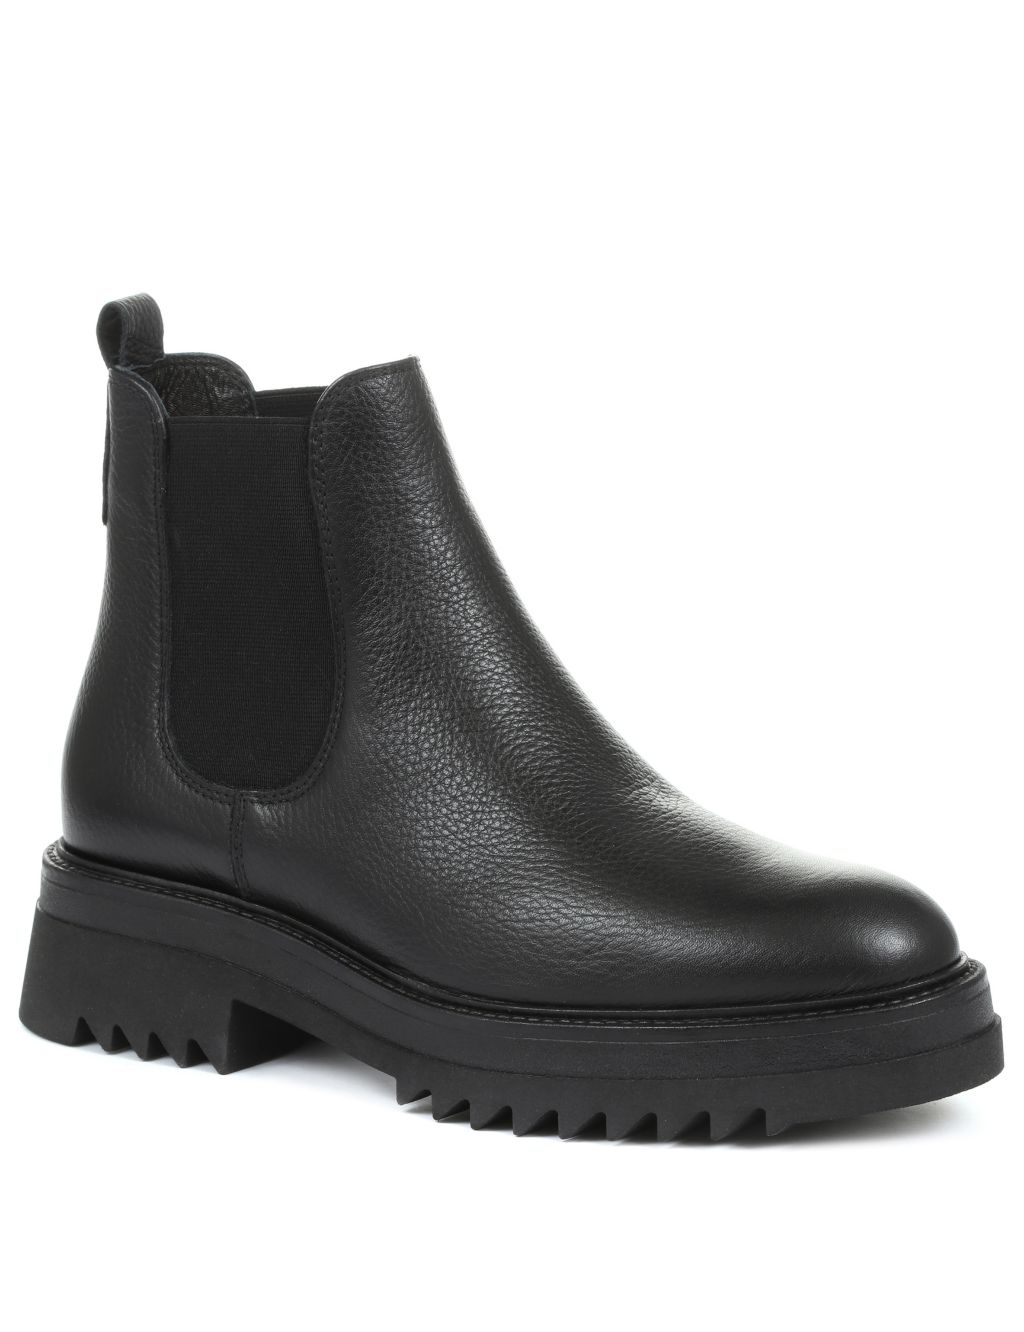 Leather Chelsea Flatform Ankle Boots image 2